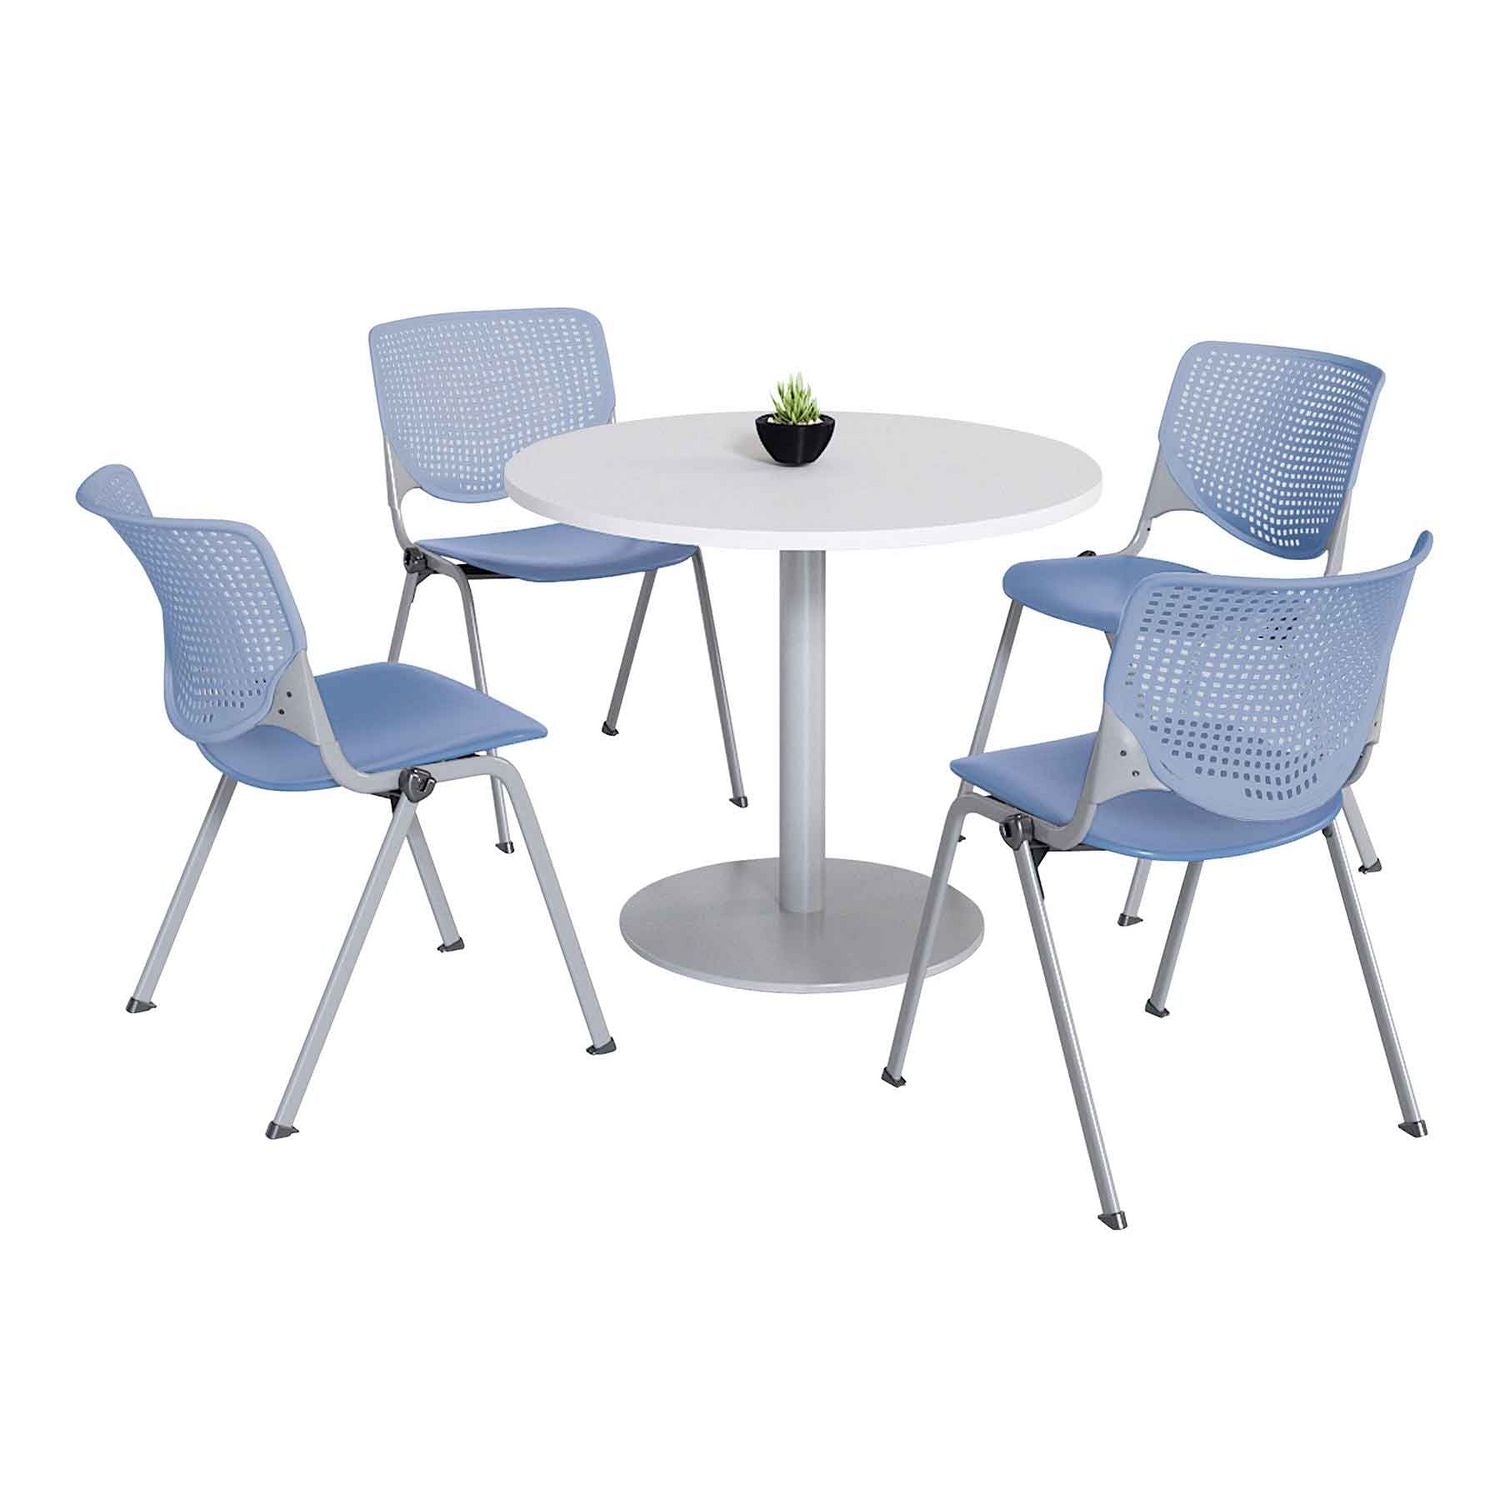 pedestal-table-with-four-periwinkle-kool-series-chairs-round-36-dia-x-29h-designer-white-ships-in-4-6-business-days_kfi811774036740 - 1